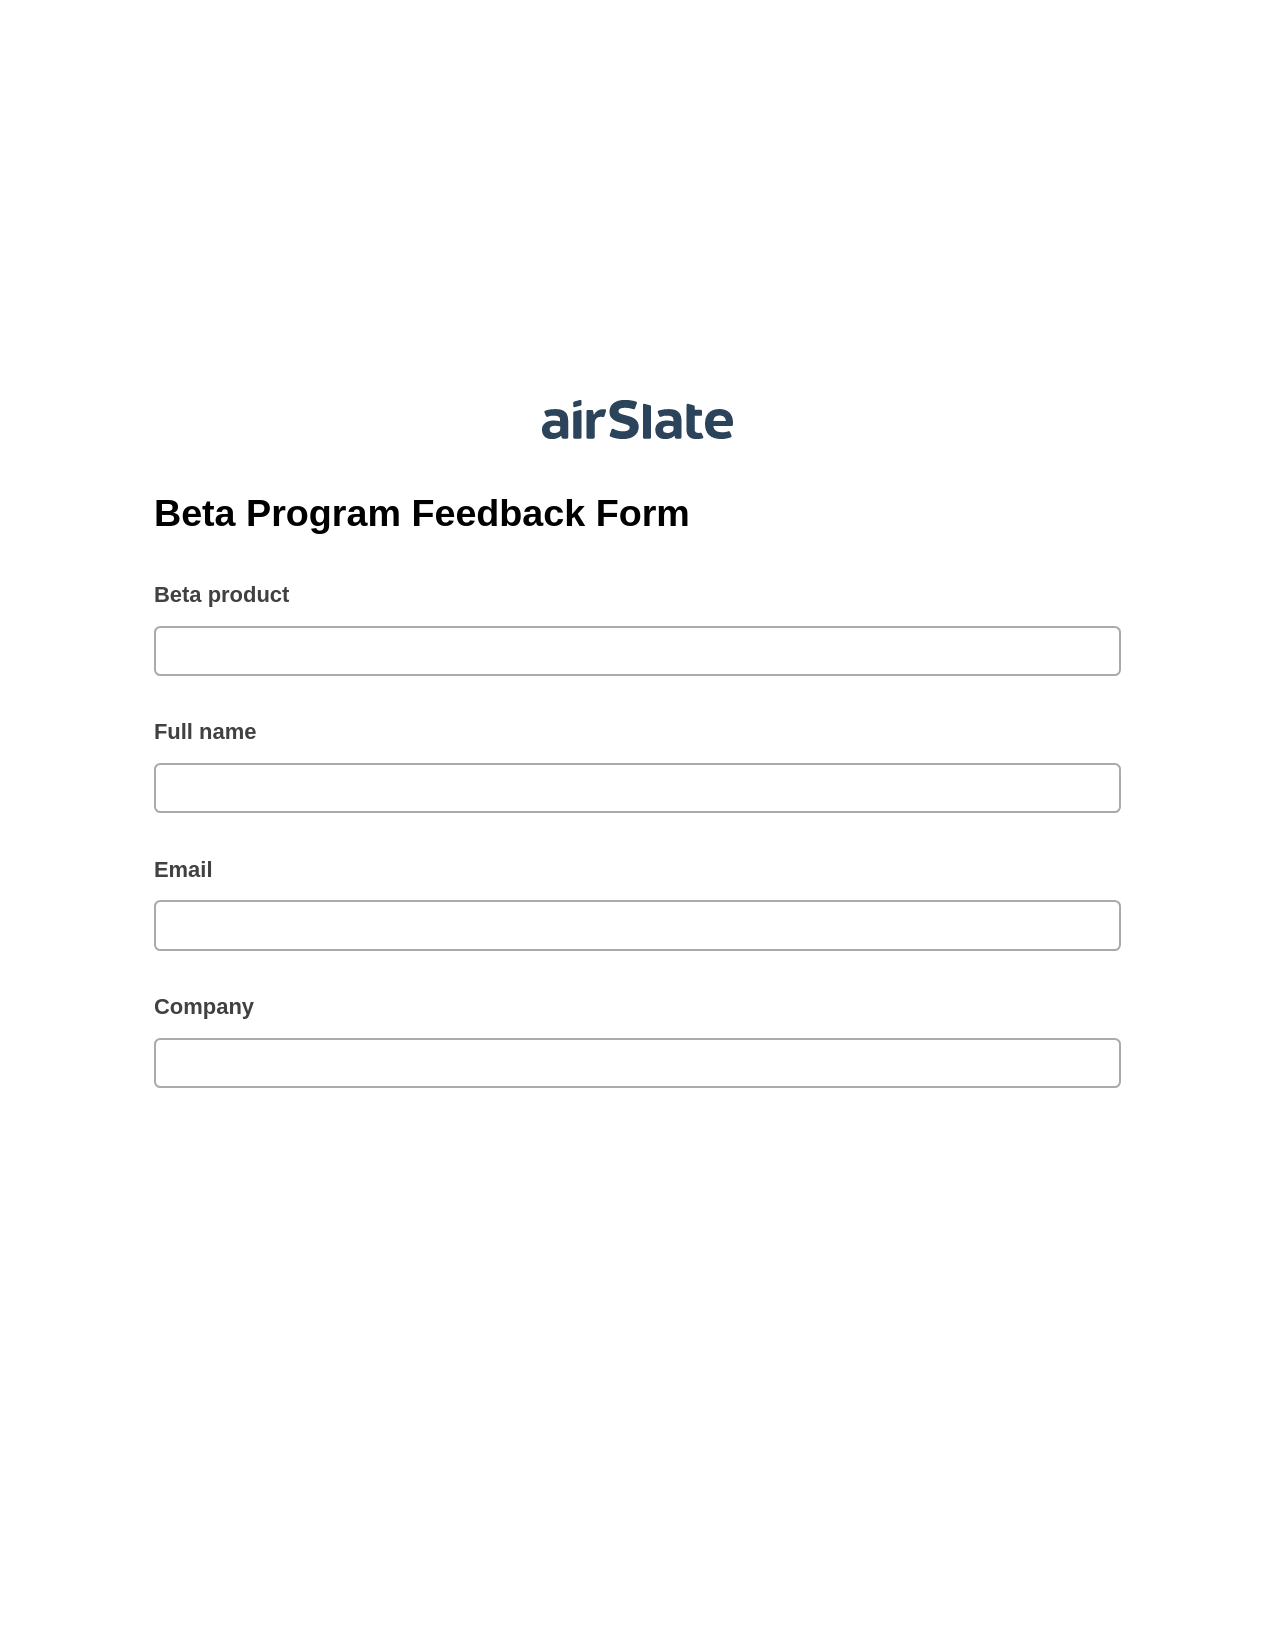 Beta Program Feedback Form Pre-fill from Google Sheets Bot, Webhook Bot, Export to Formstack Documents Bot